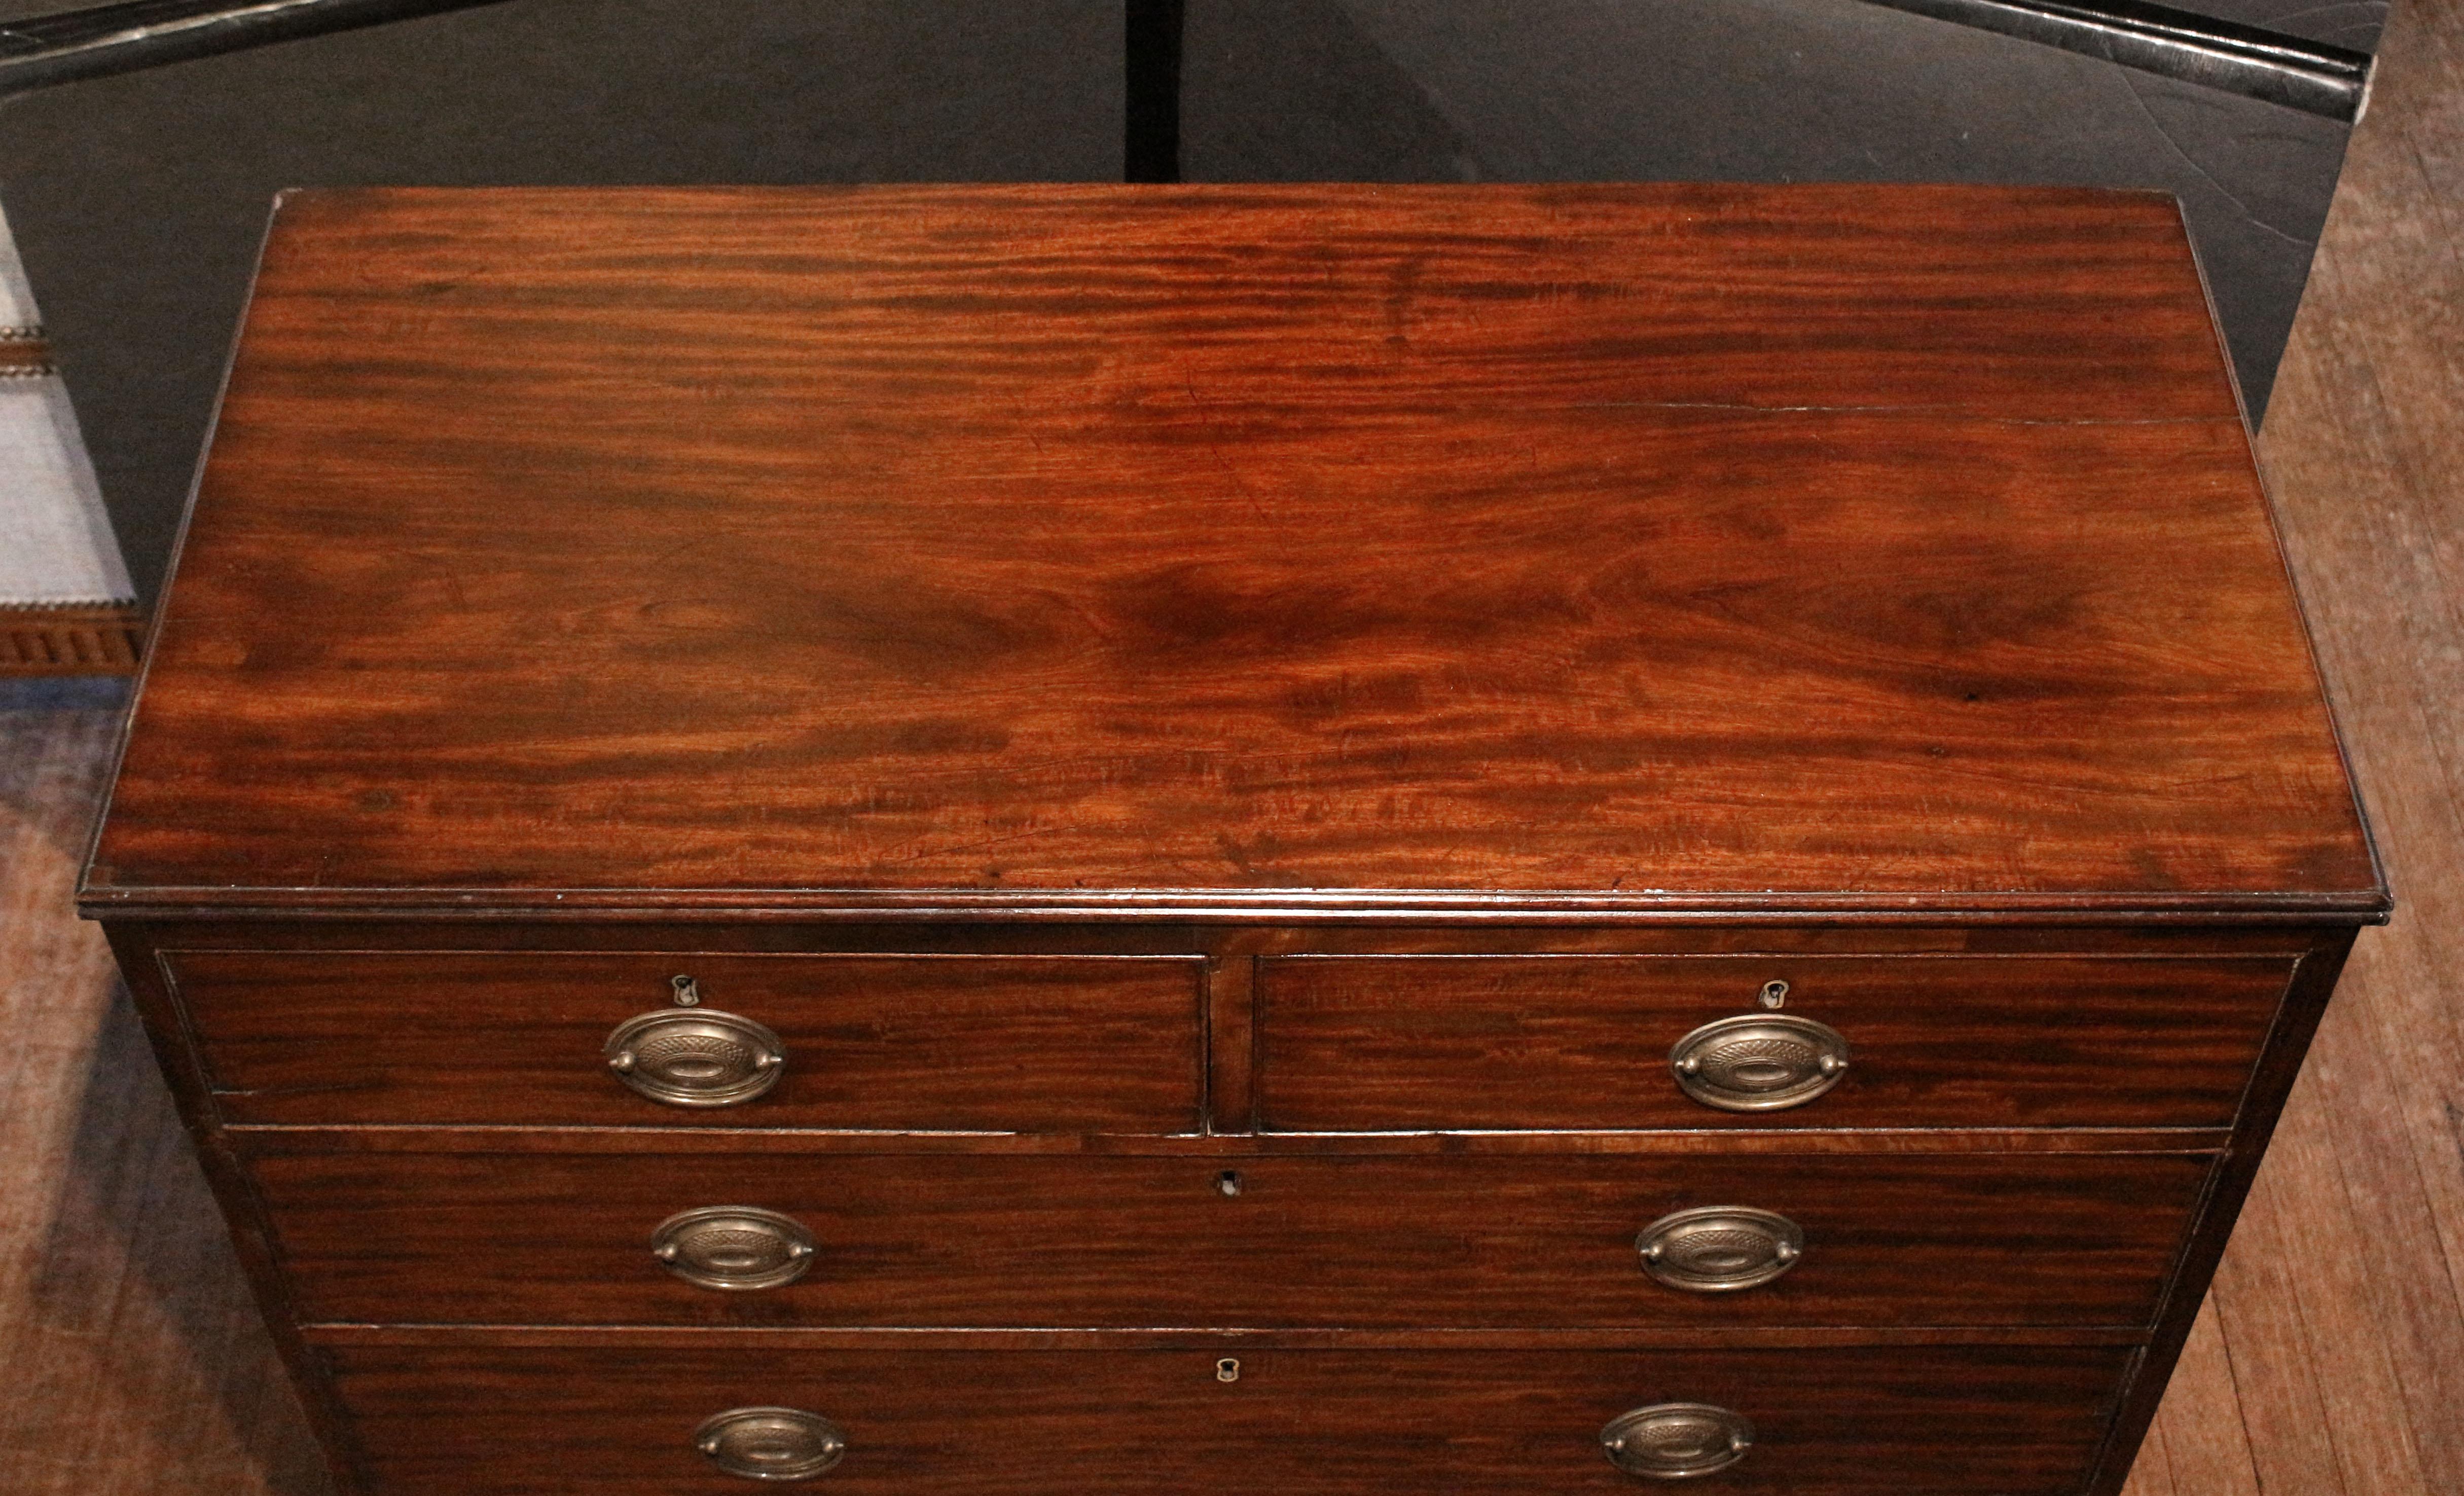 Circa 1800 English George III Period Chest of Drawers In Good Condition For Sale In Chapel Hill, NC